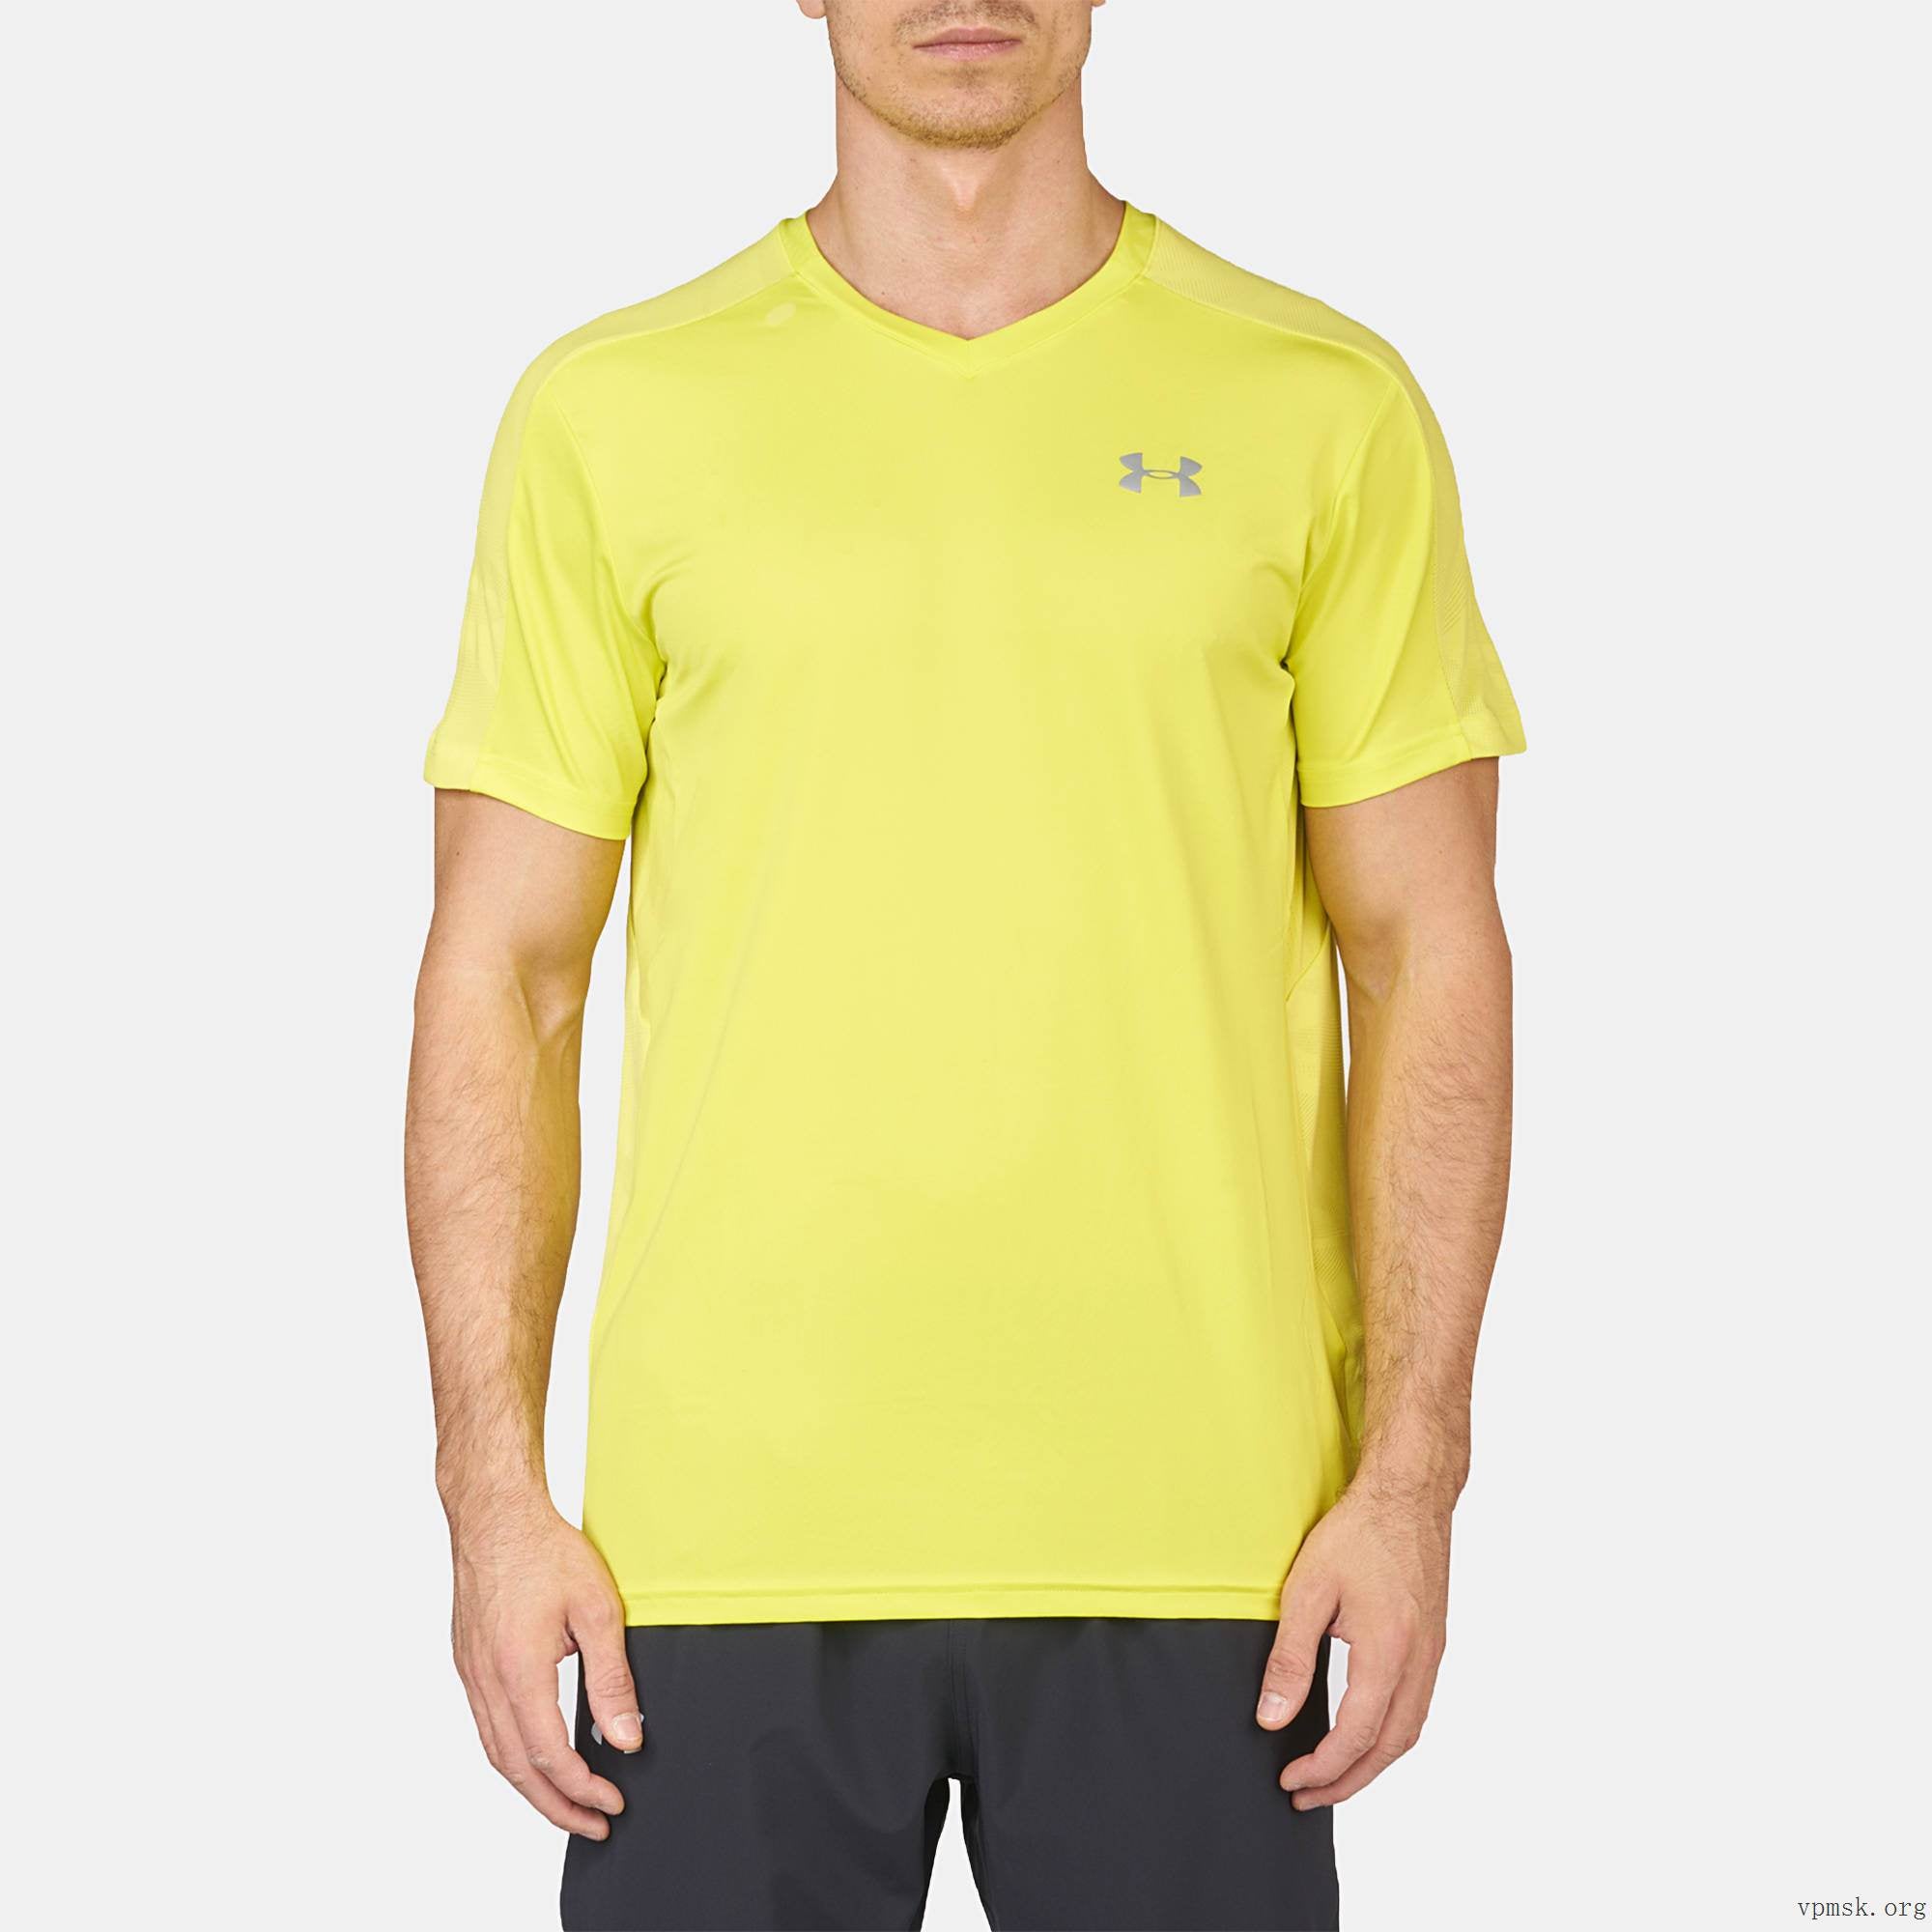 Under Armour CoolSwitch Run Short Sleeve Mens Top - Yellow 1284965-738